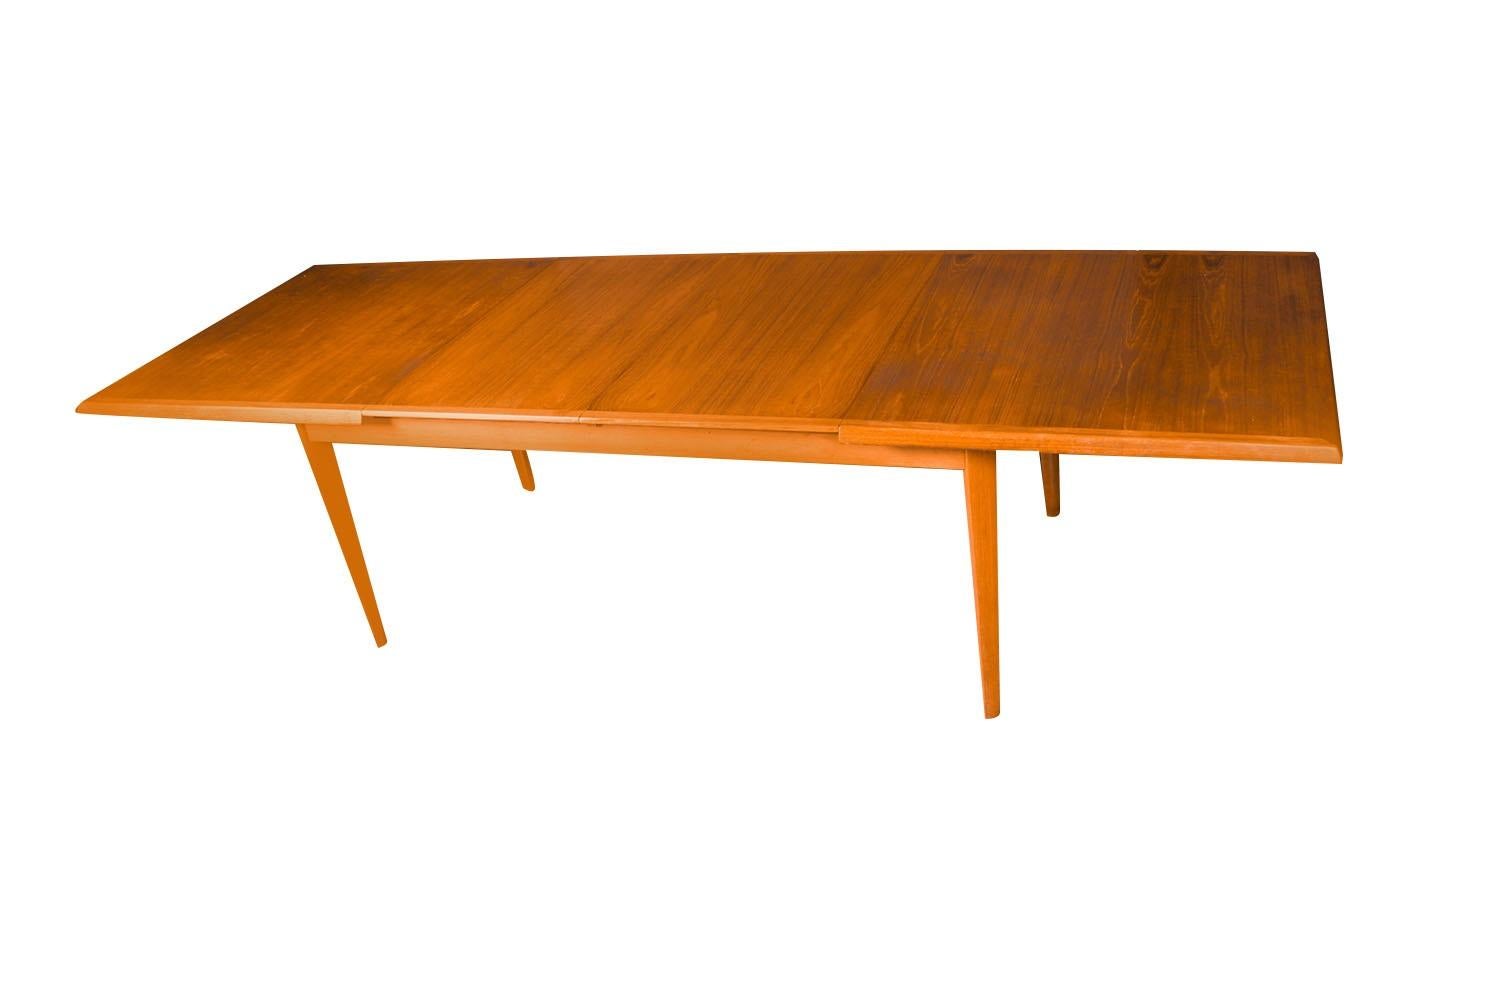 Beautiful large Danish, teak Mid-Century Modern expandable dining table. Features richly grained, teak top. Raised over four tapered legs, creating a clean and elegant profile. This remarkably large dining table comes with two extension leaves to